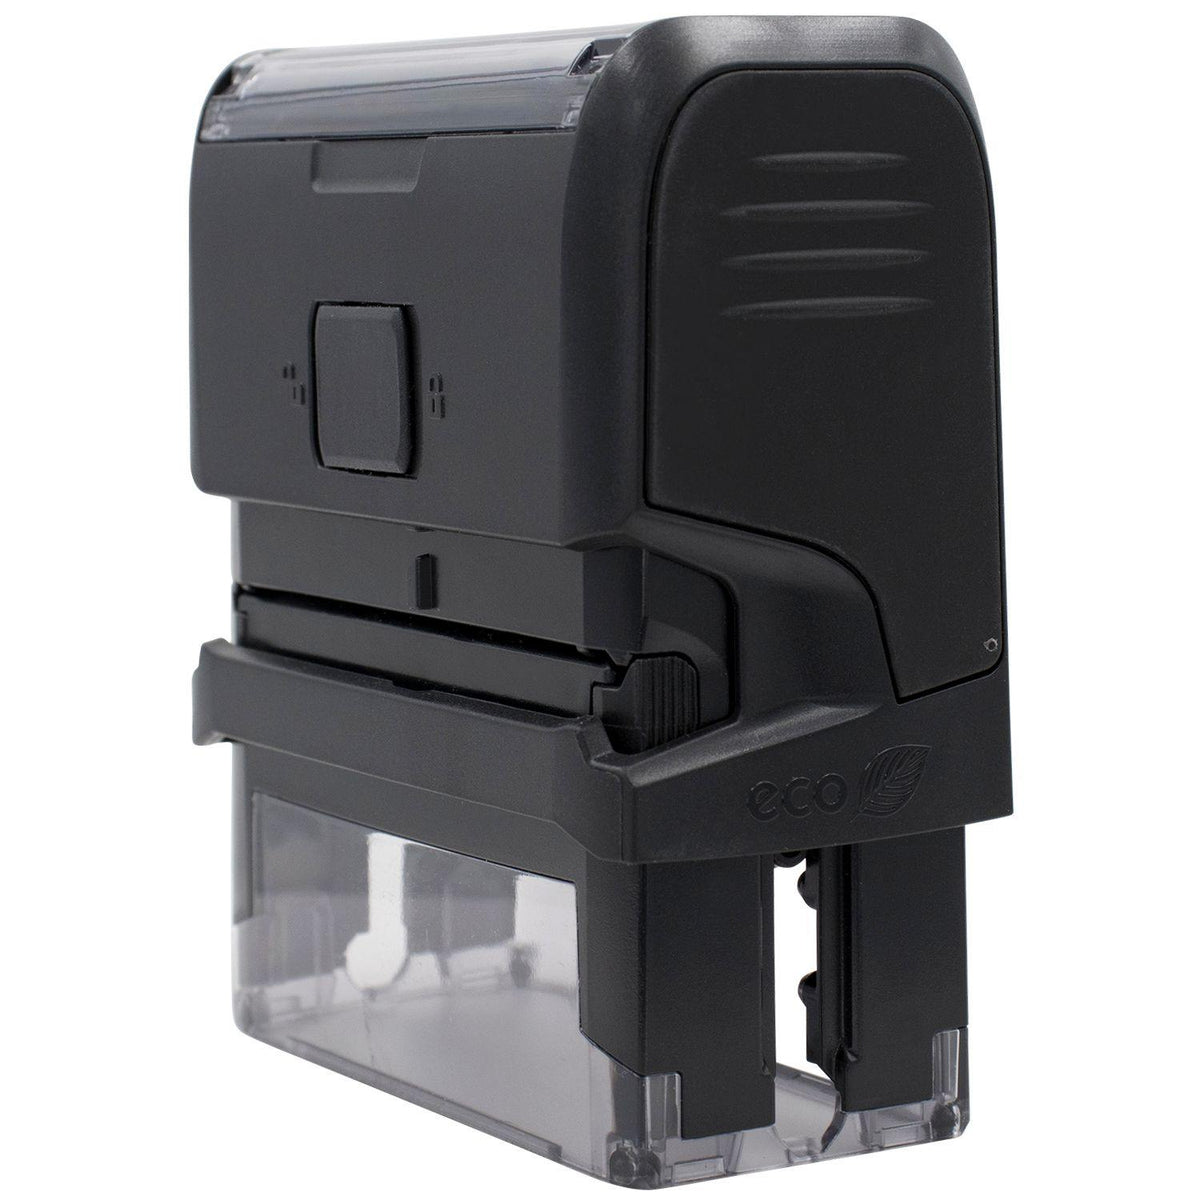 Large Self-Inking Original with Hand Stamp - Engineer Seal Stamps - Brand_Trodat, Impression Size_Large, Stamp Type_Self-Inking Stamp, Type of Use_General, Type of Use_Office